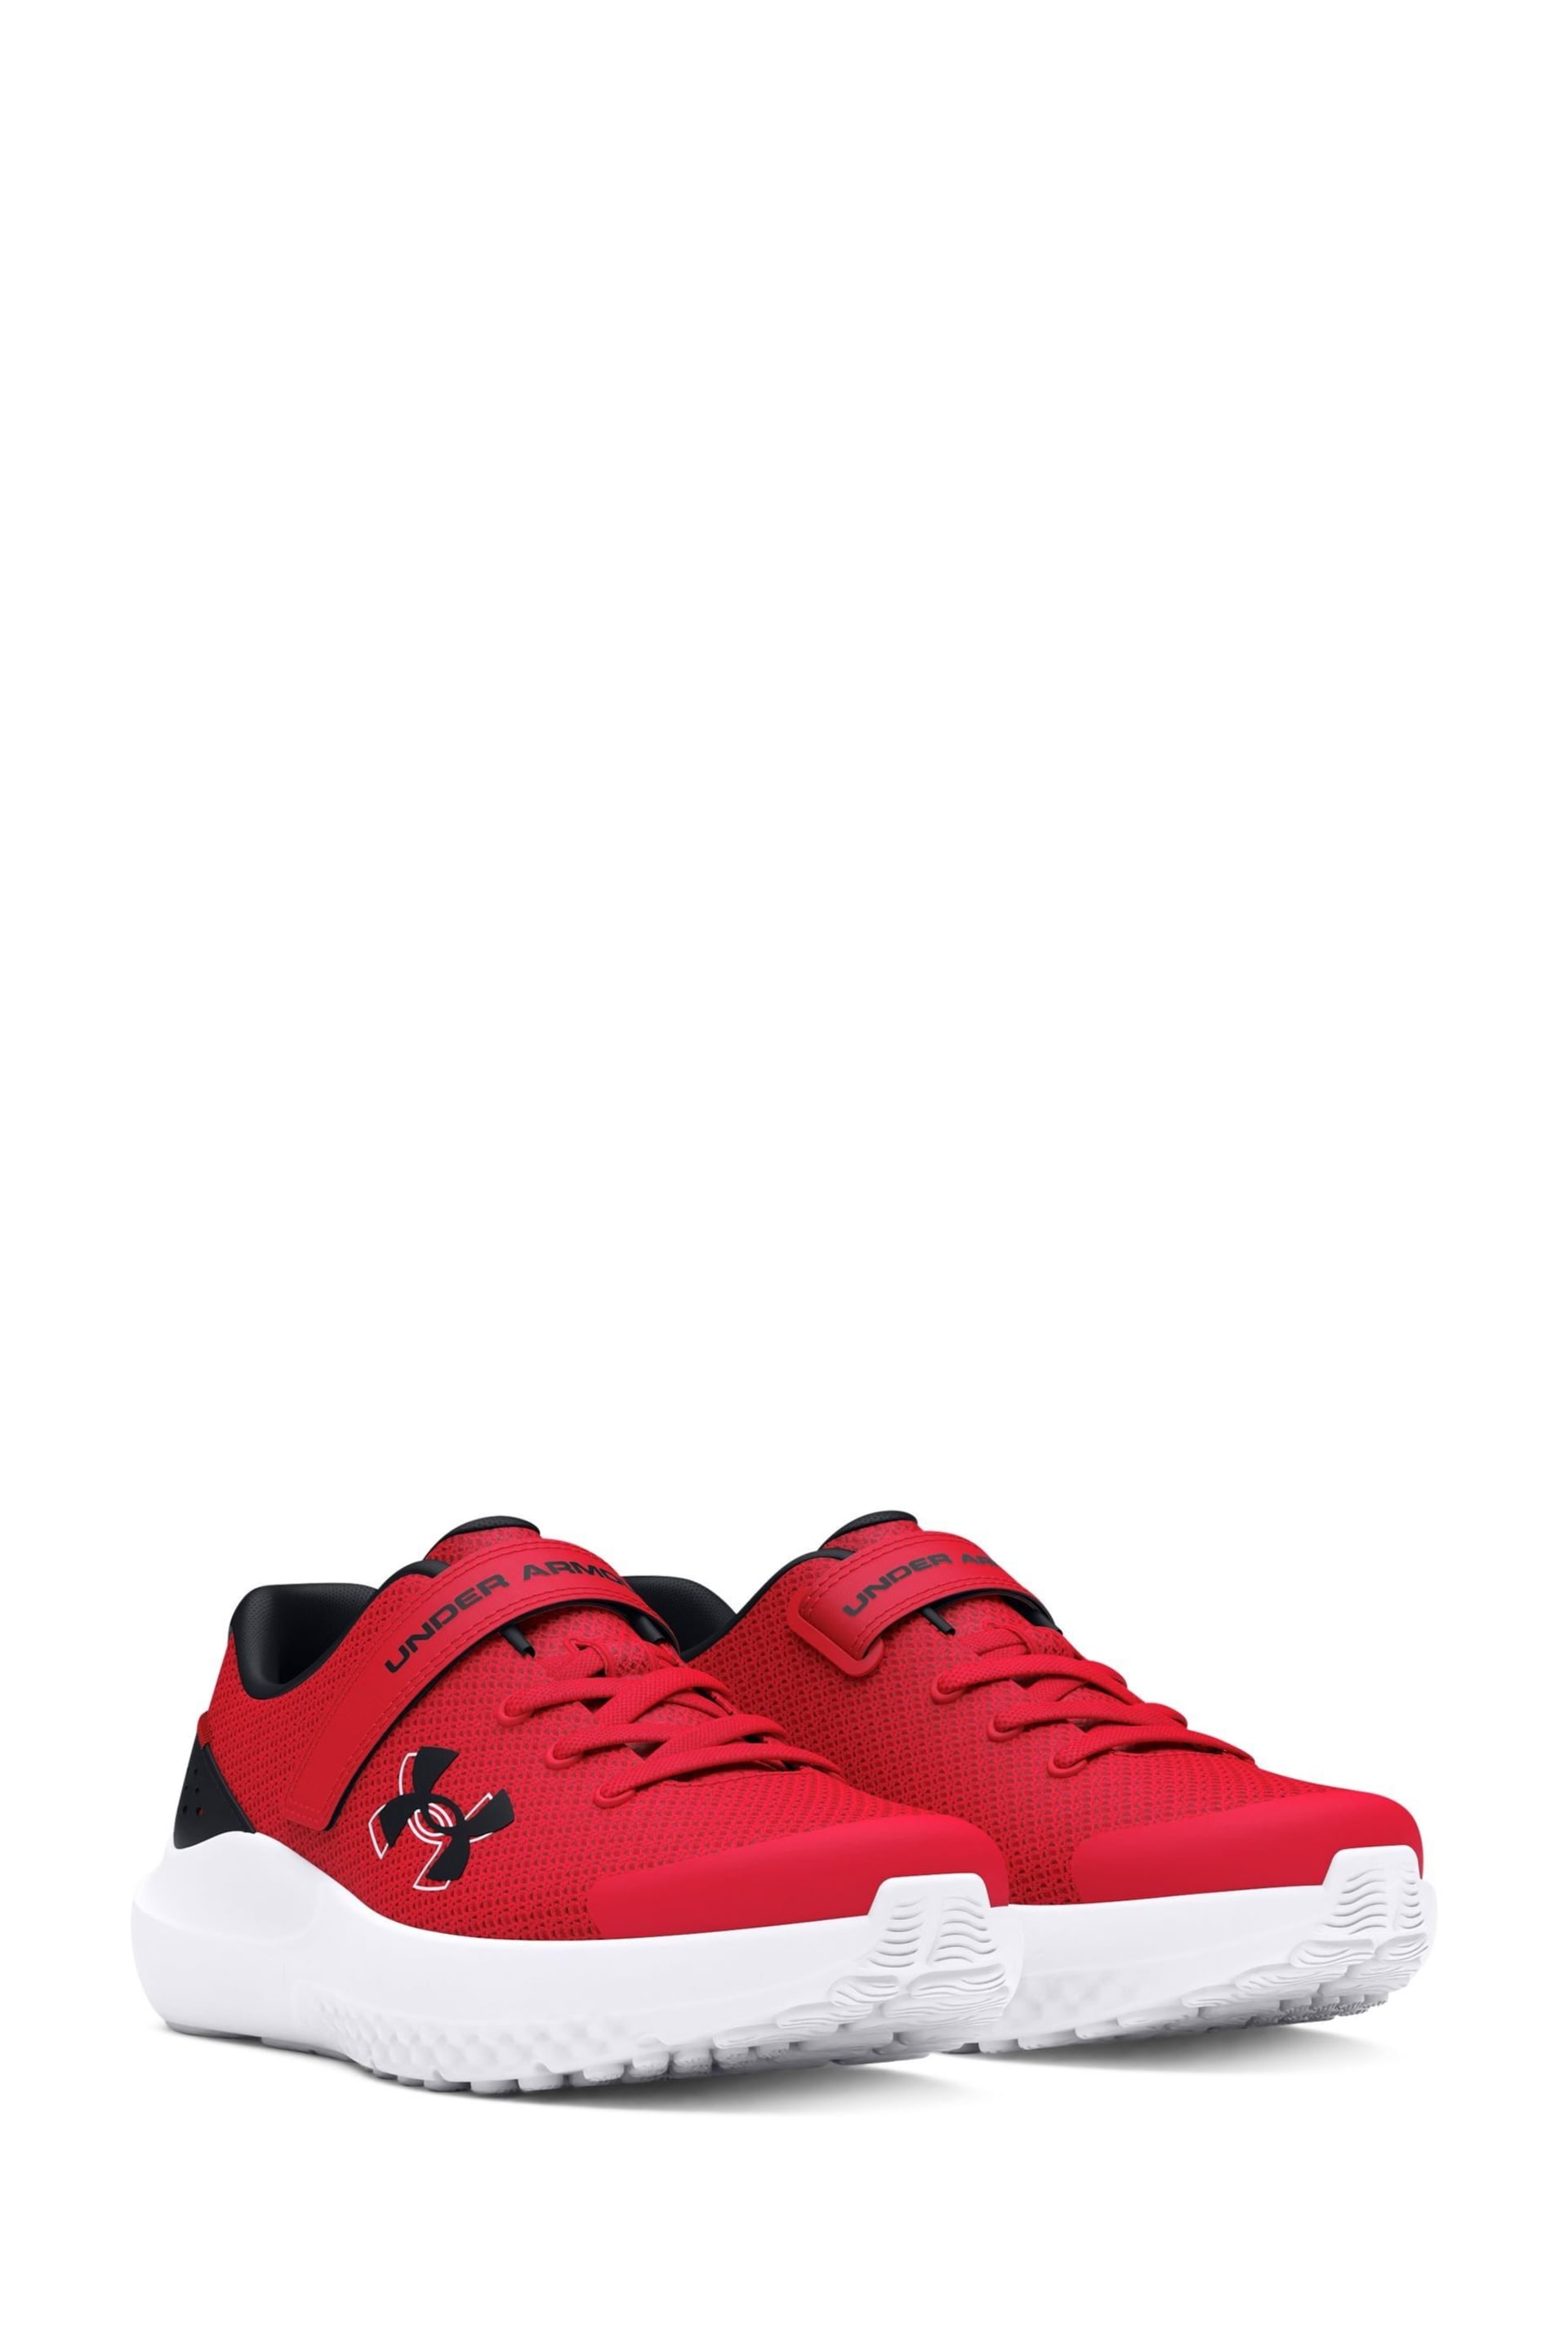 Under Armour Red Surge 4 Trainers - Image 5 of 7